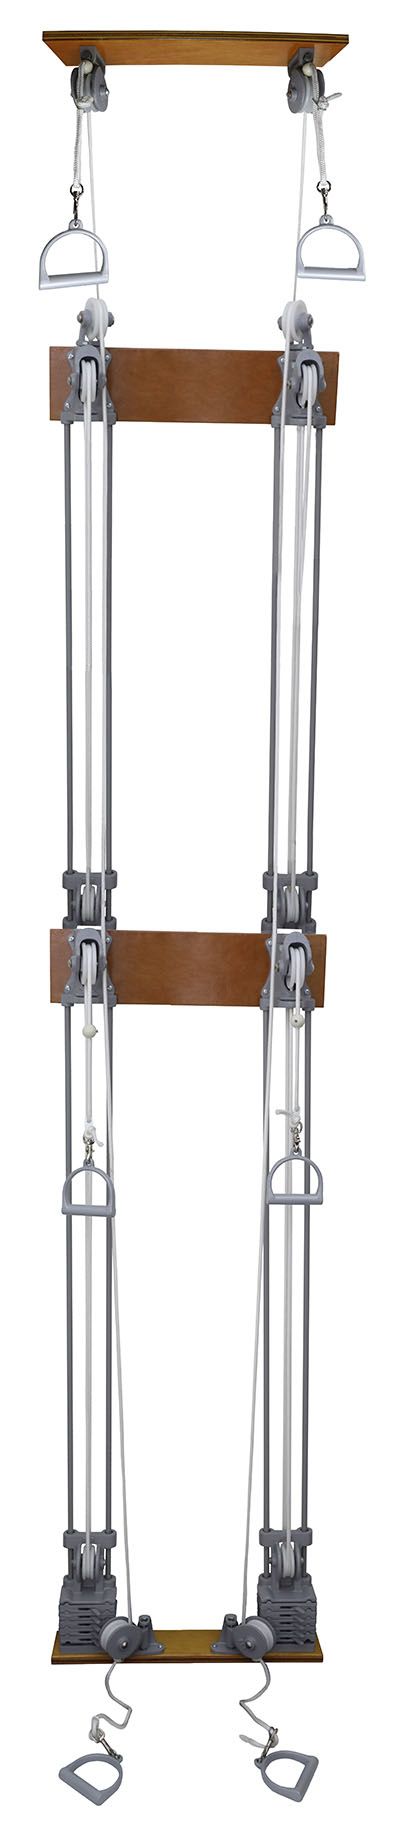 Triple Handle Pulley, Dual Tower Weight System (Chest/Floor/Overhead) with 20 lb. Weights (10lbs./tower) 